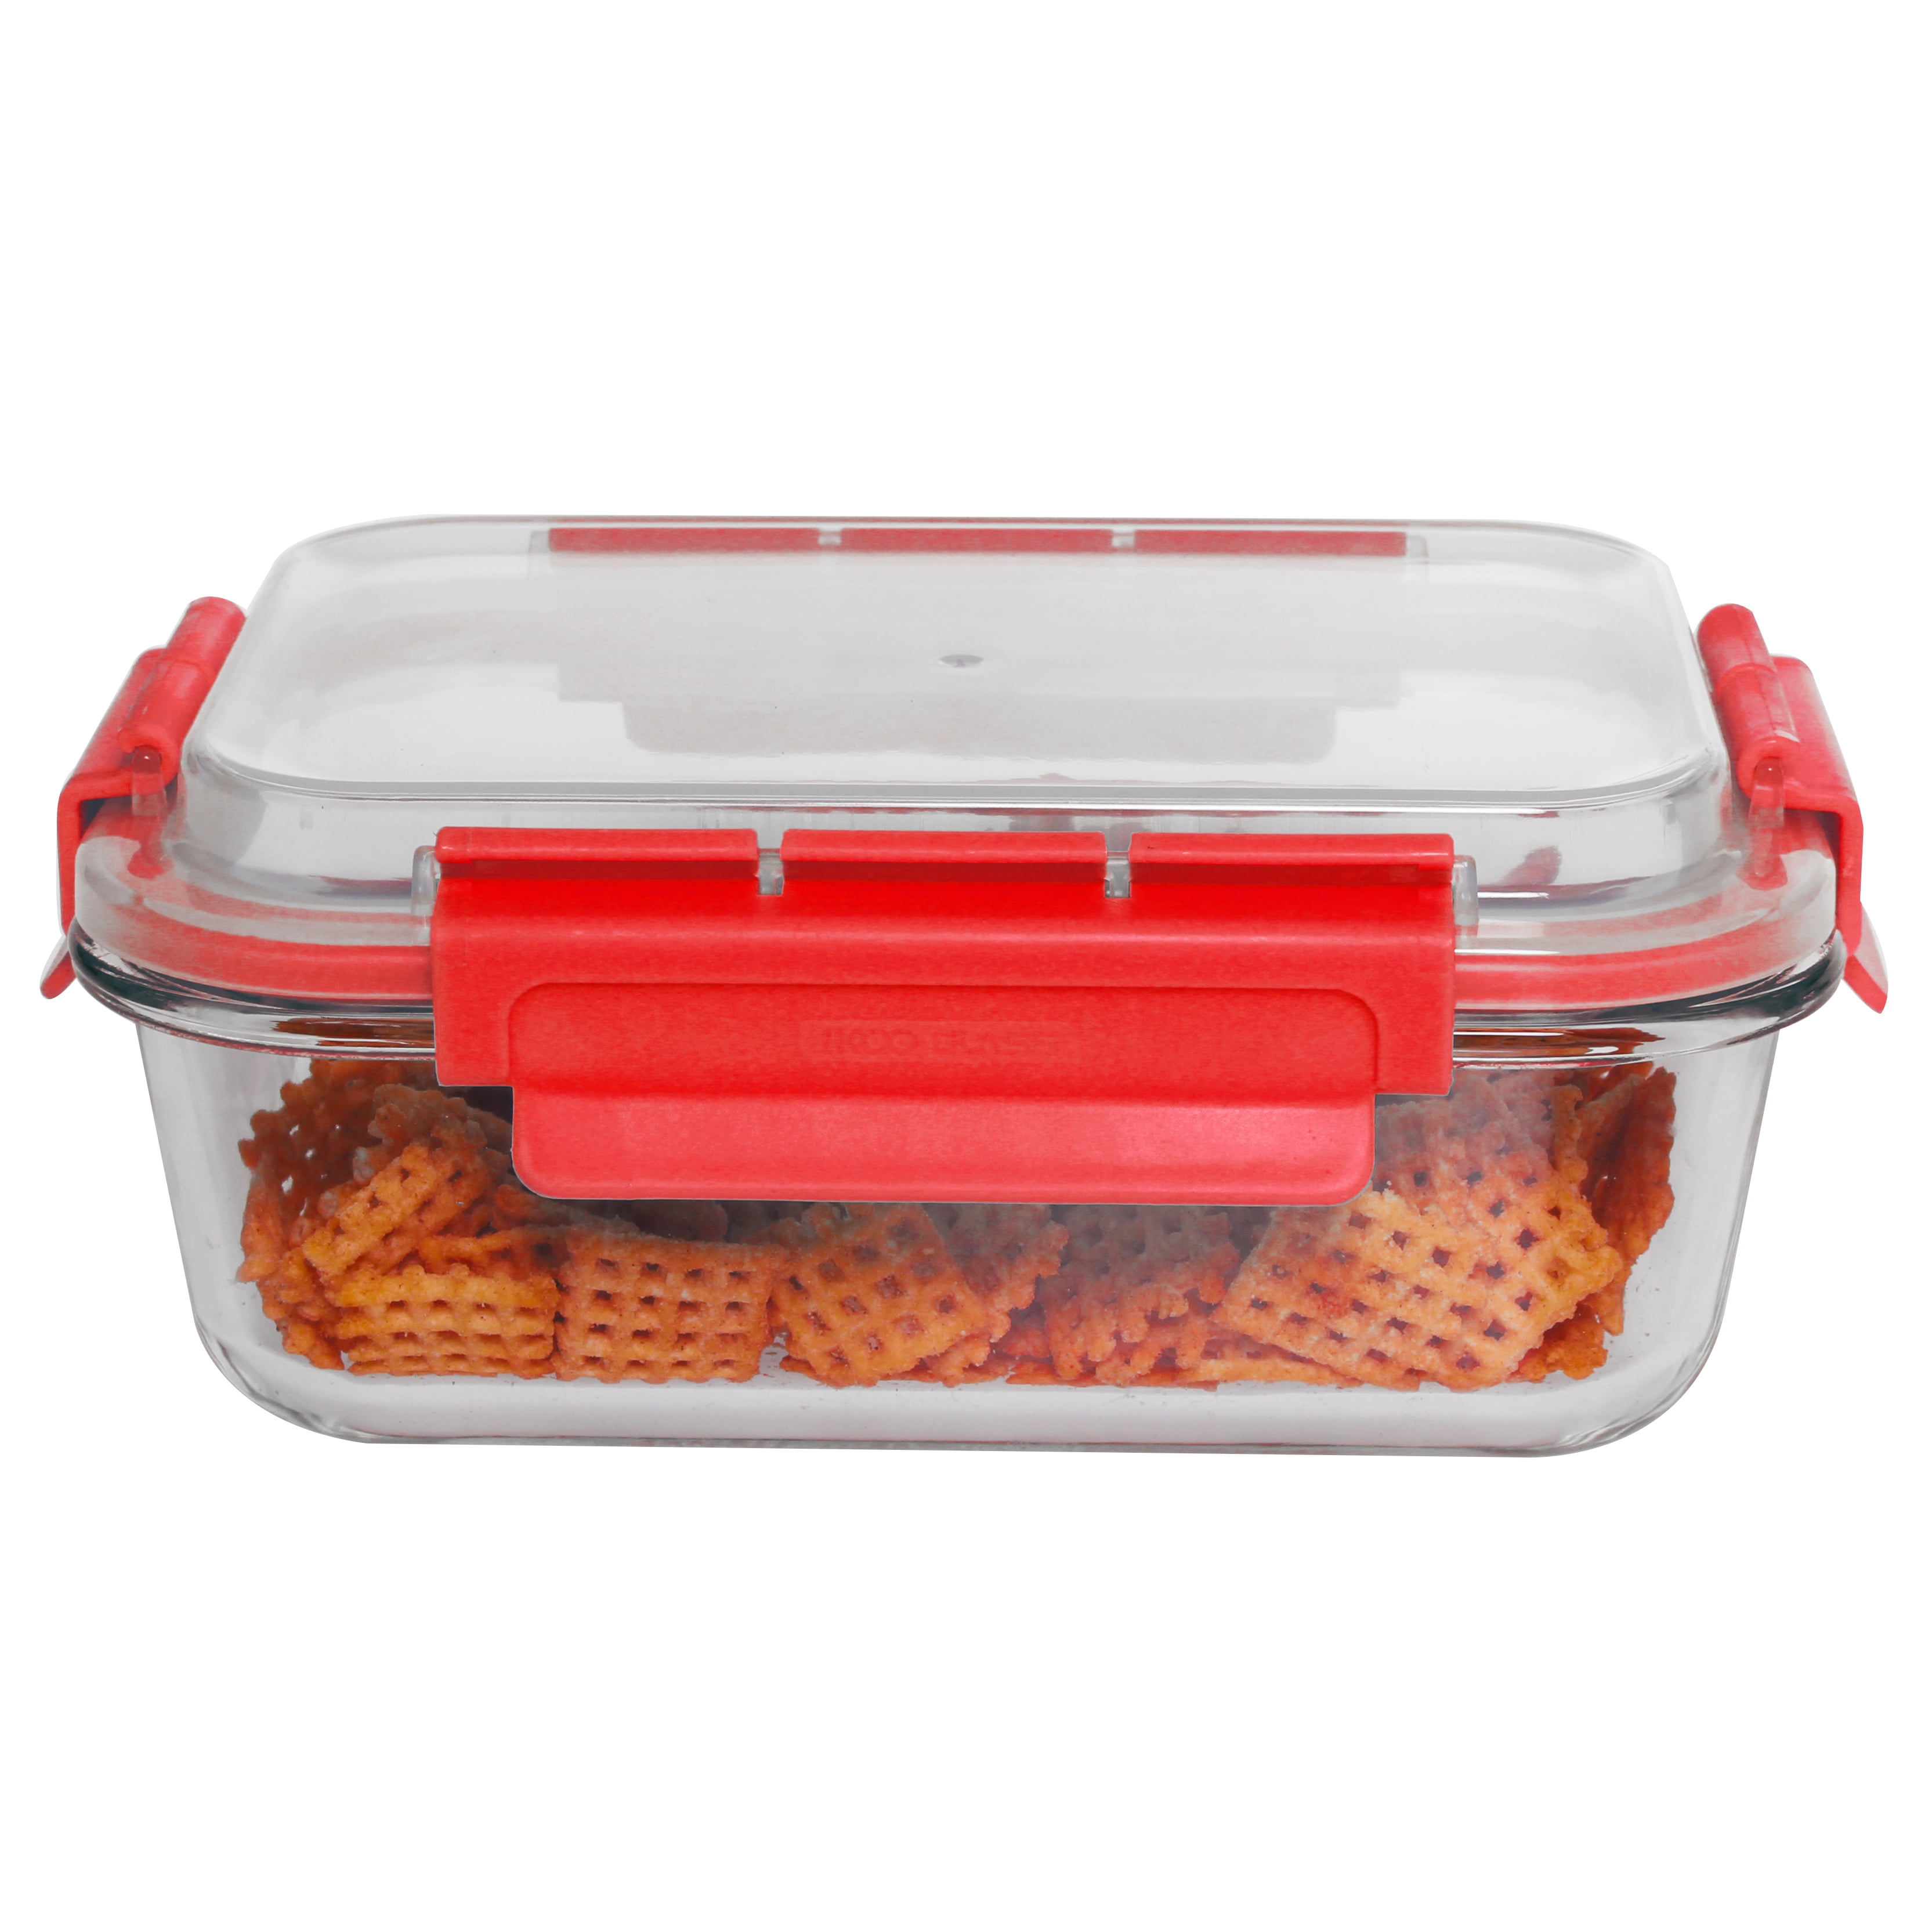  Meal Prep Containers [38OZ] Plastic Food Storage Containers  With Lids,10-Pack Reusable To Go Containers, Disposable Food Prep Containers,  BPA-free, Stackable, Microwave/Dishwasher/Freezer Safe: Home & Kitchen